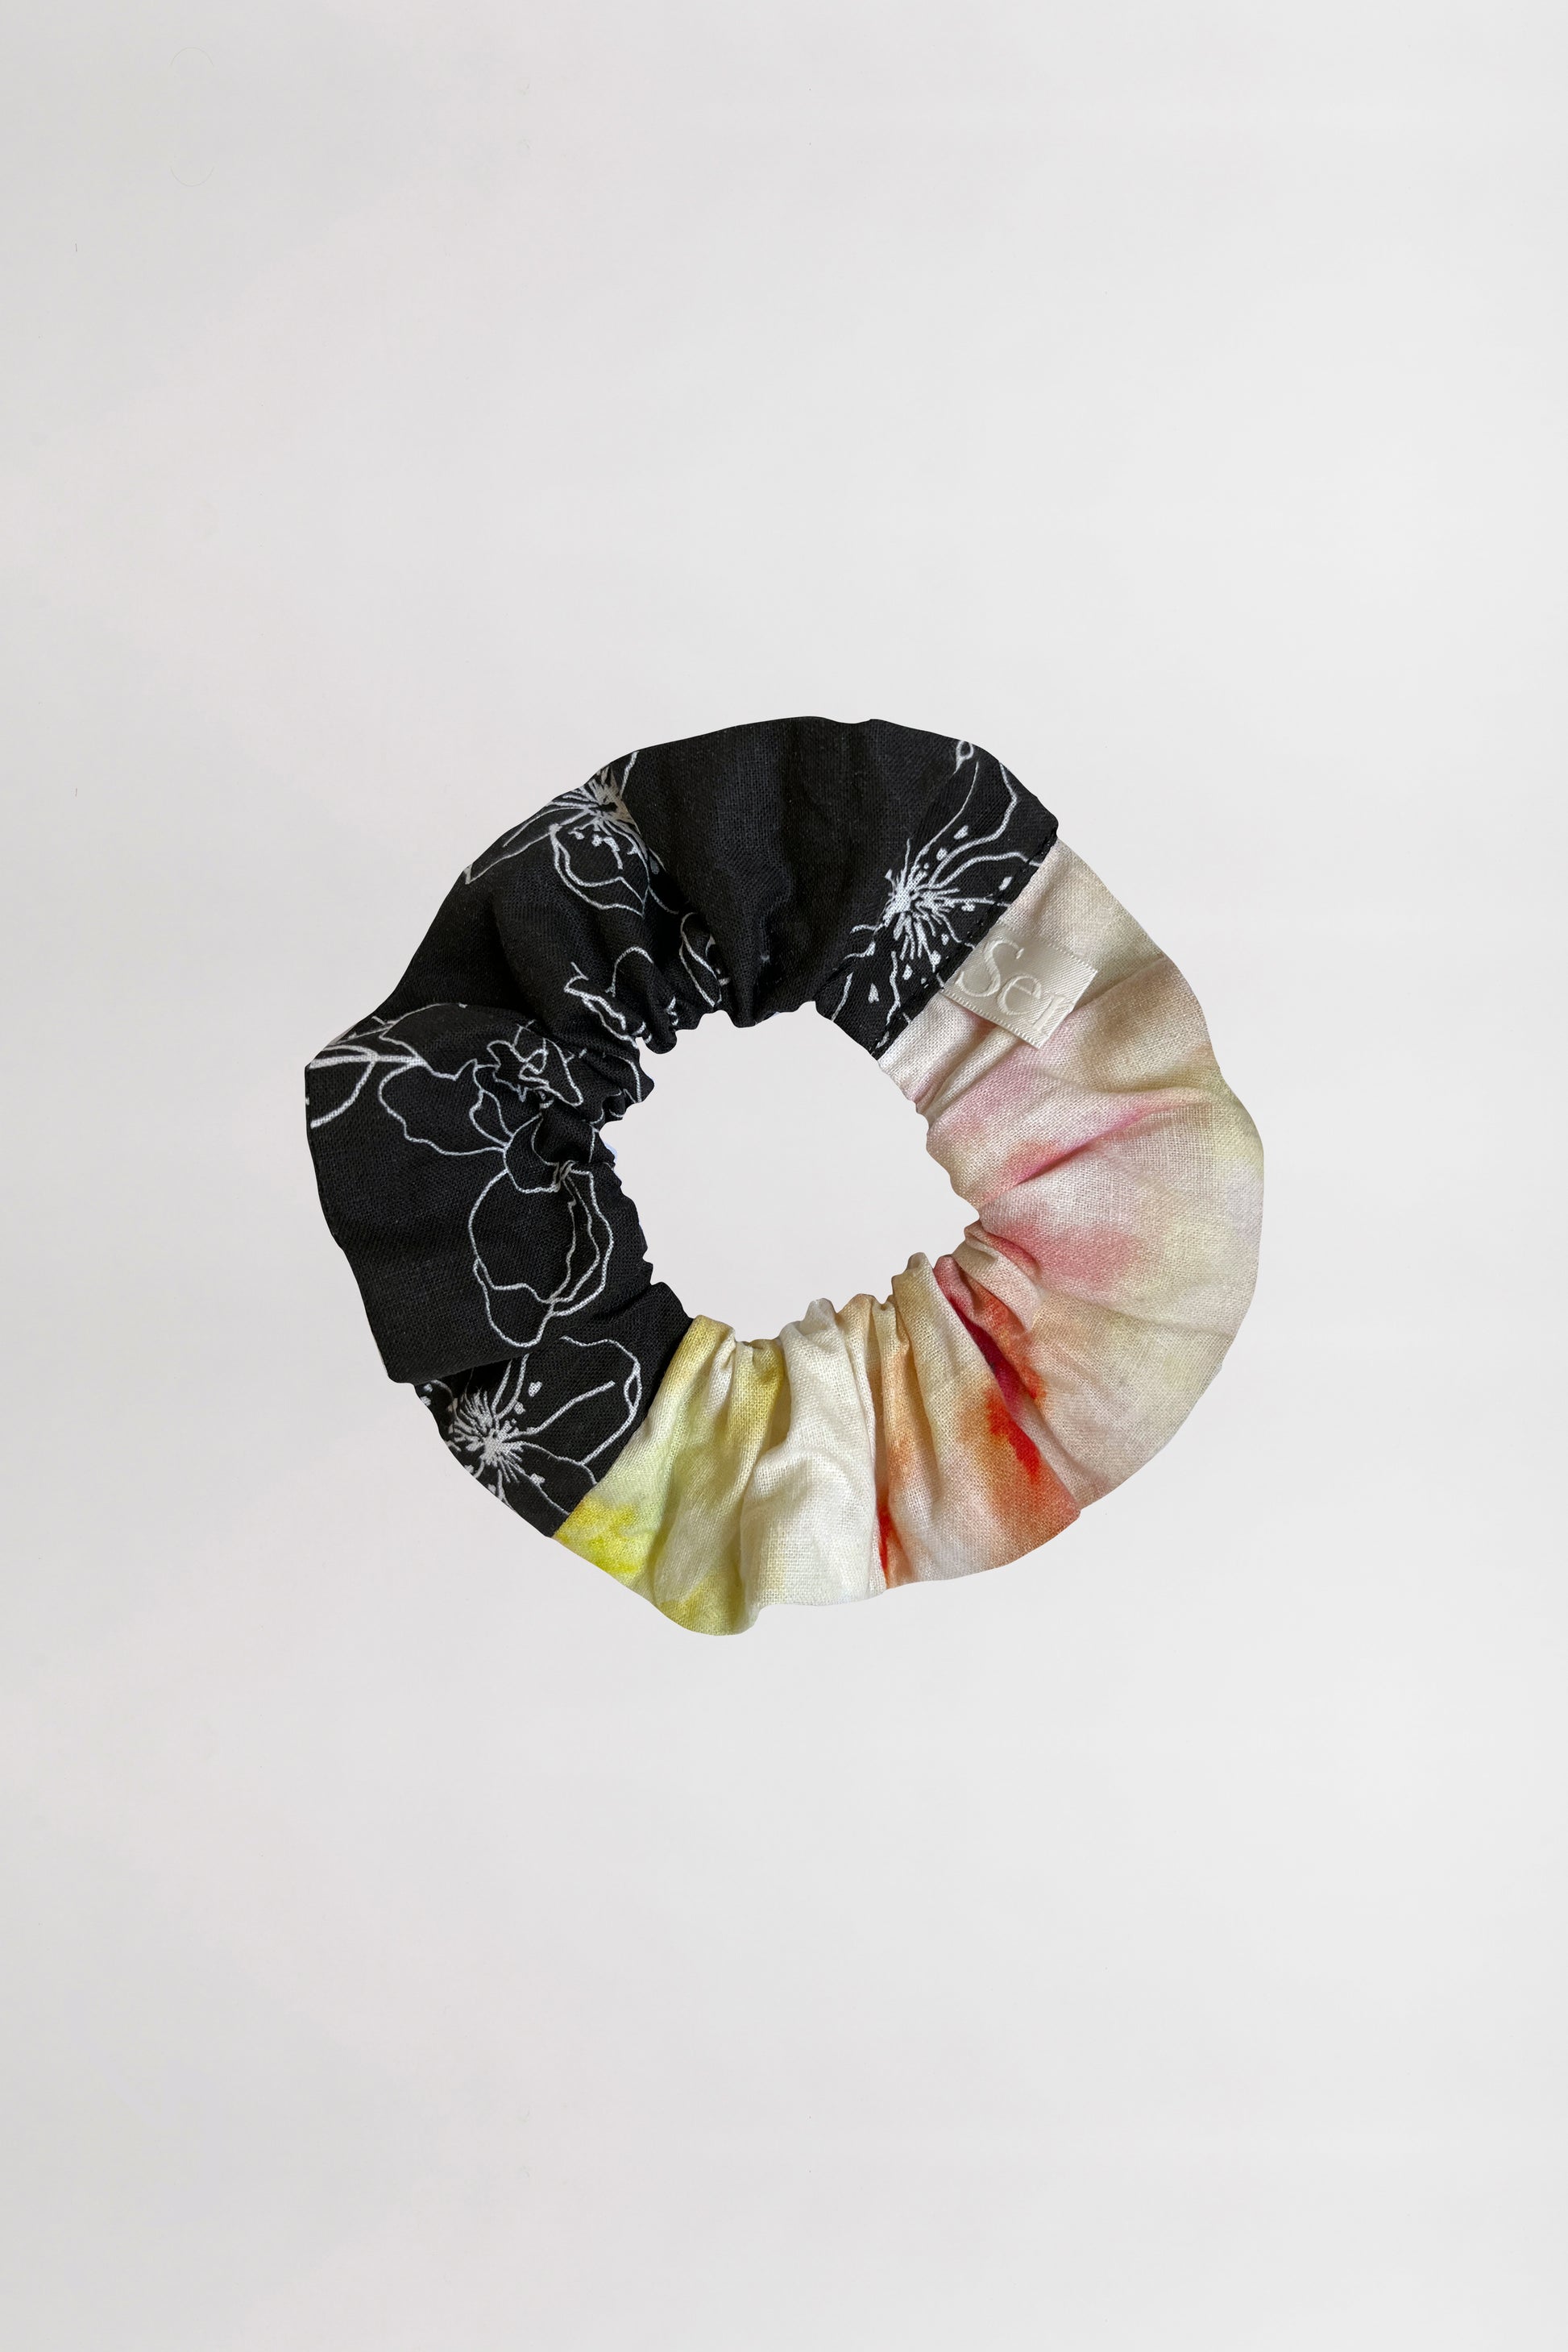 Front view of a scrunchie showcasing two distinct prints – one floral, the other abstract – crafted from leftover fabrics against a neutral background.